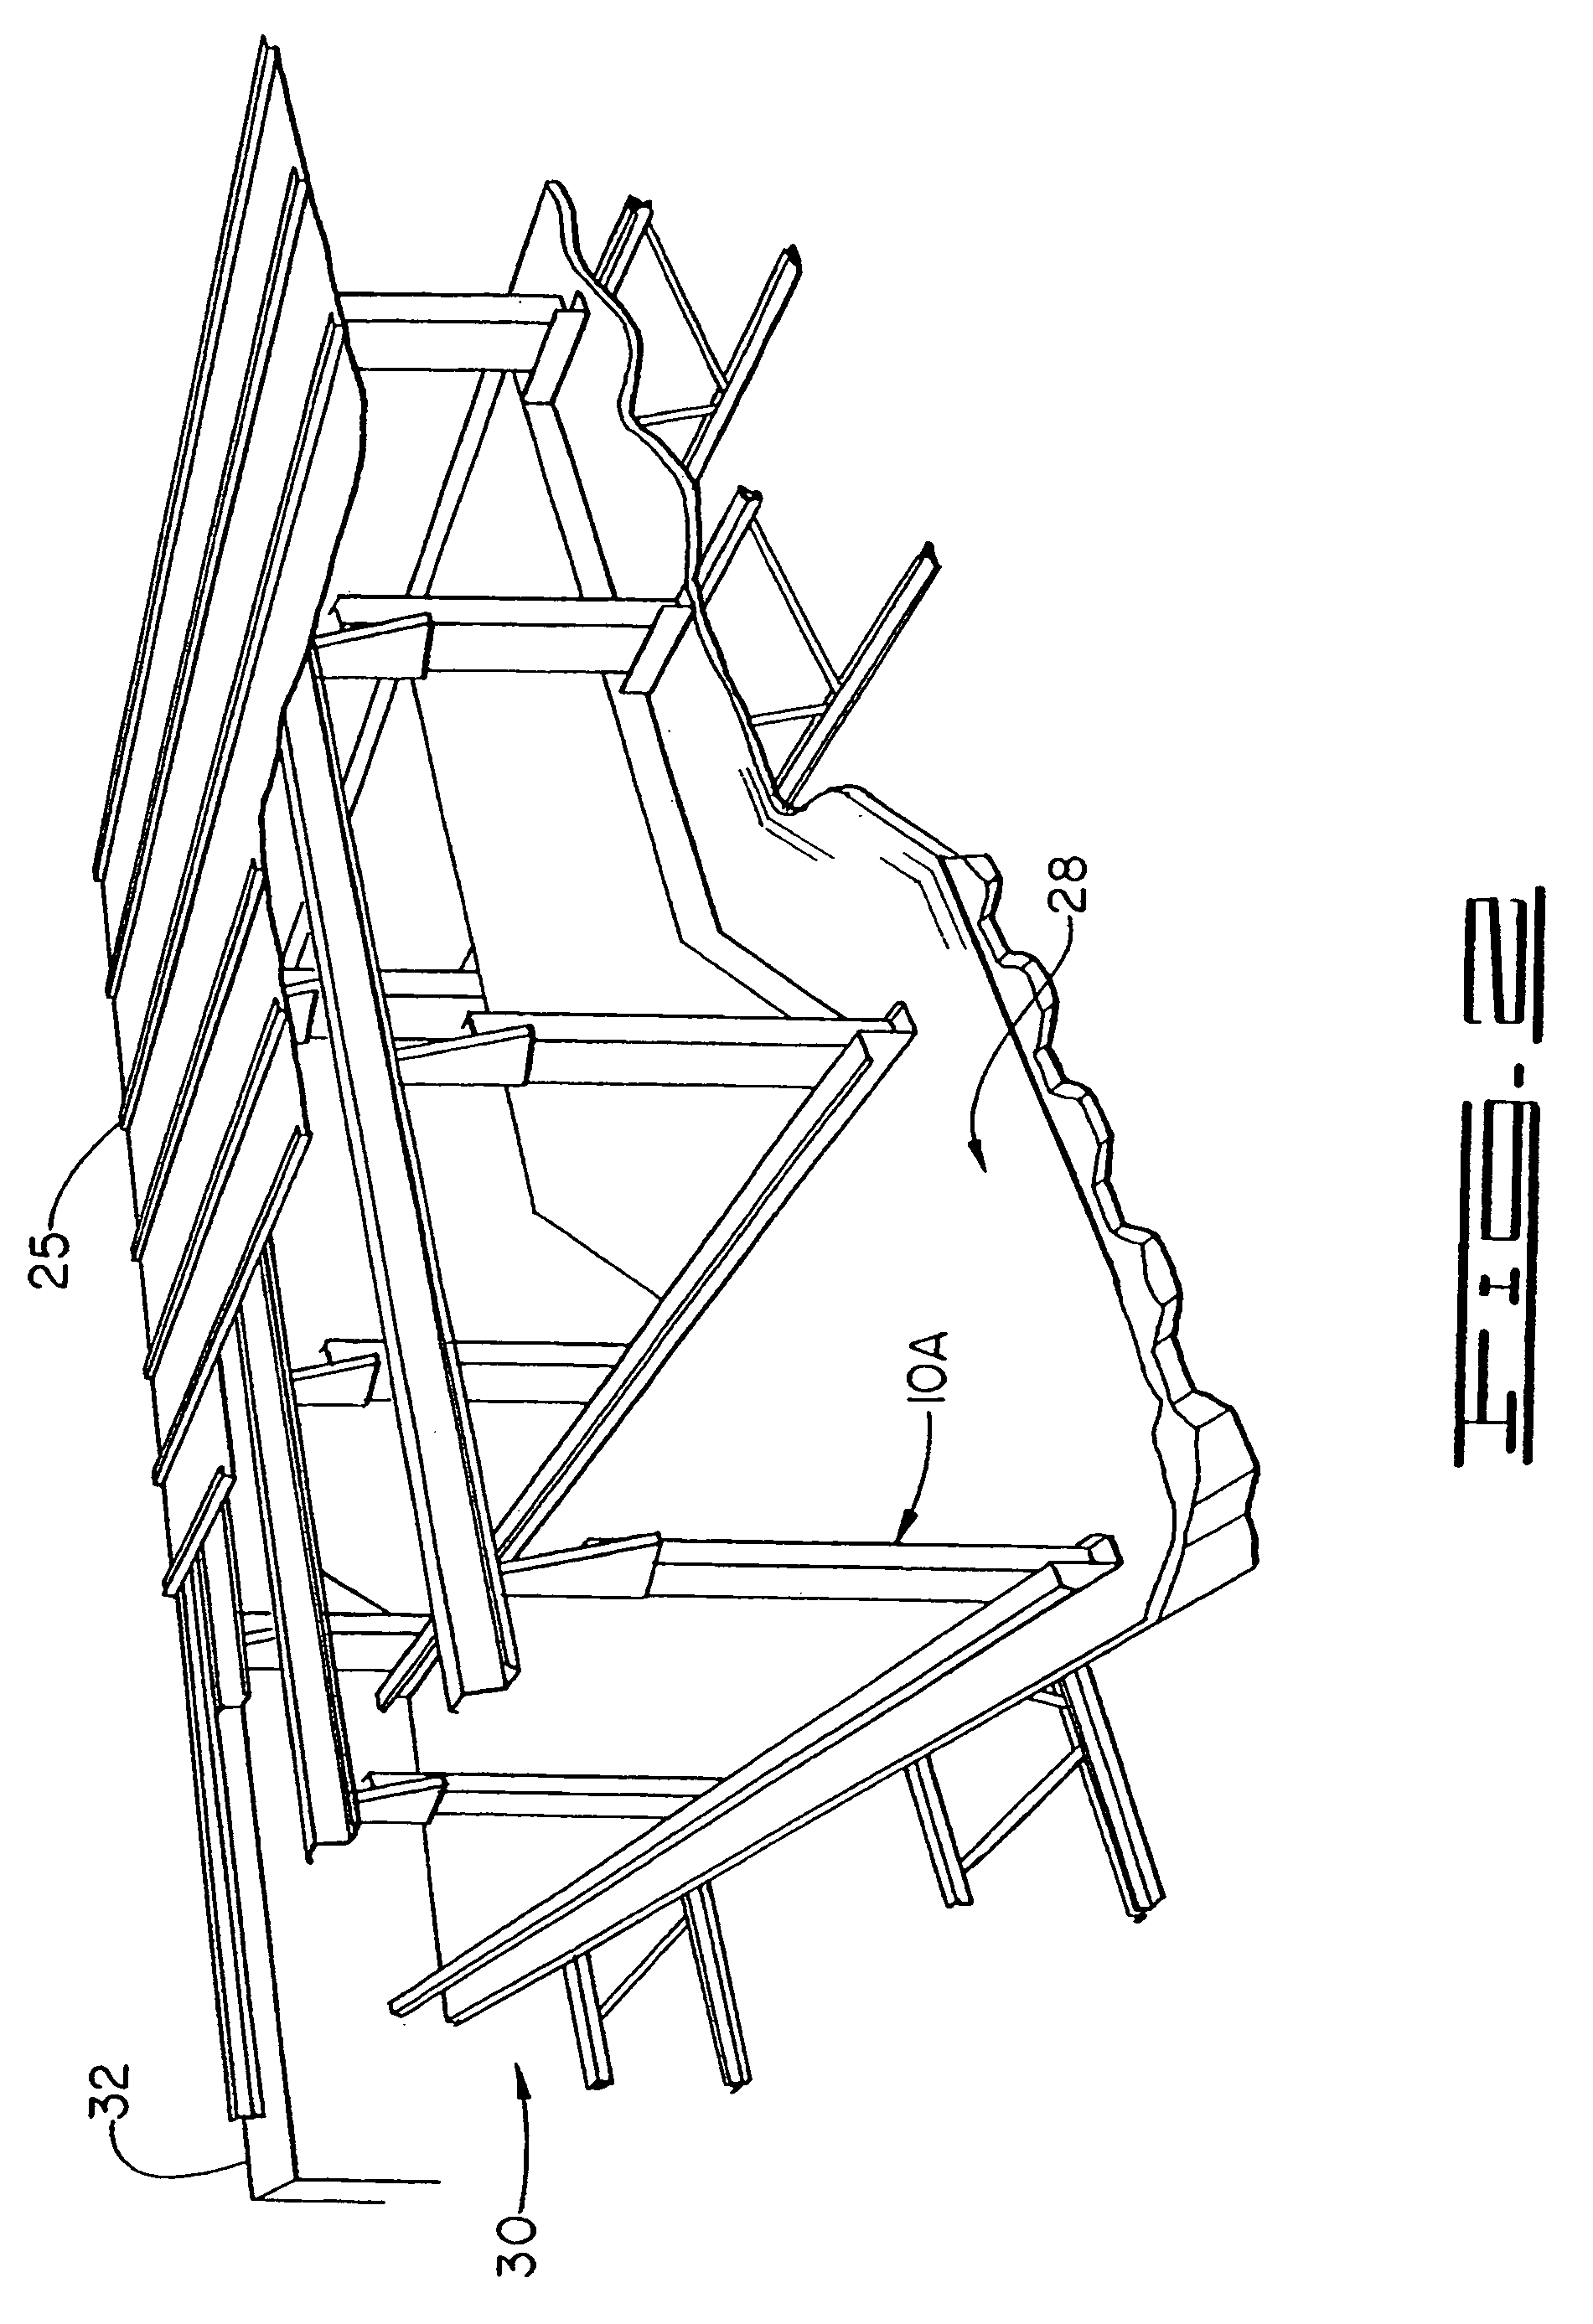 Standing seam roof assembly having increased sidelap shear capacity